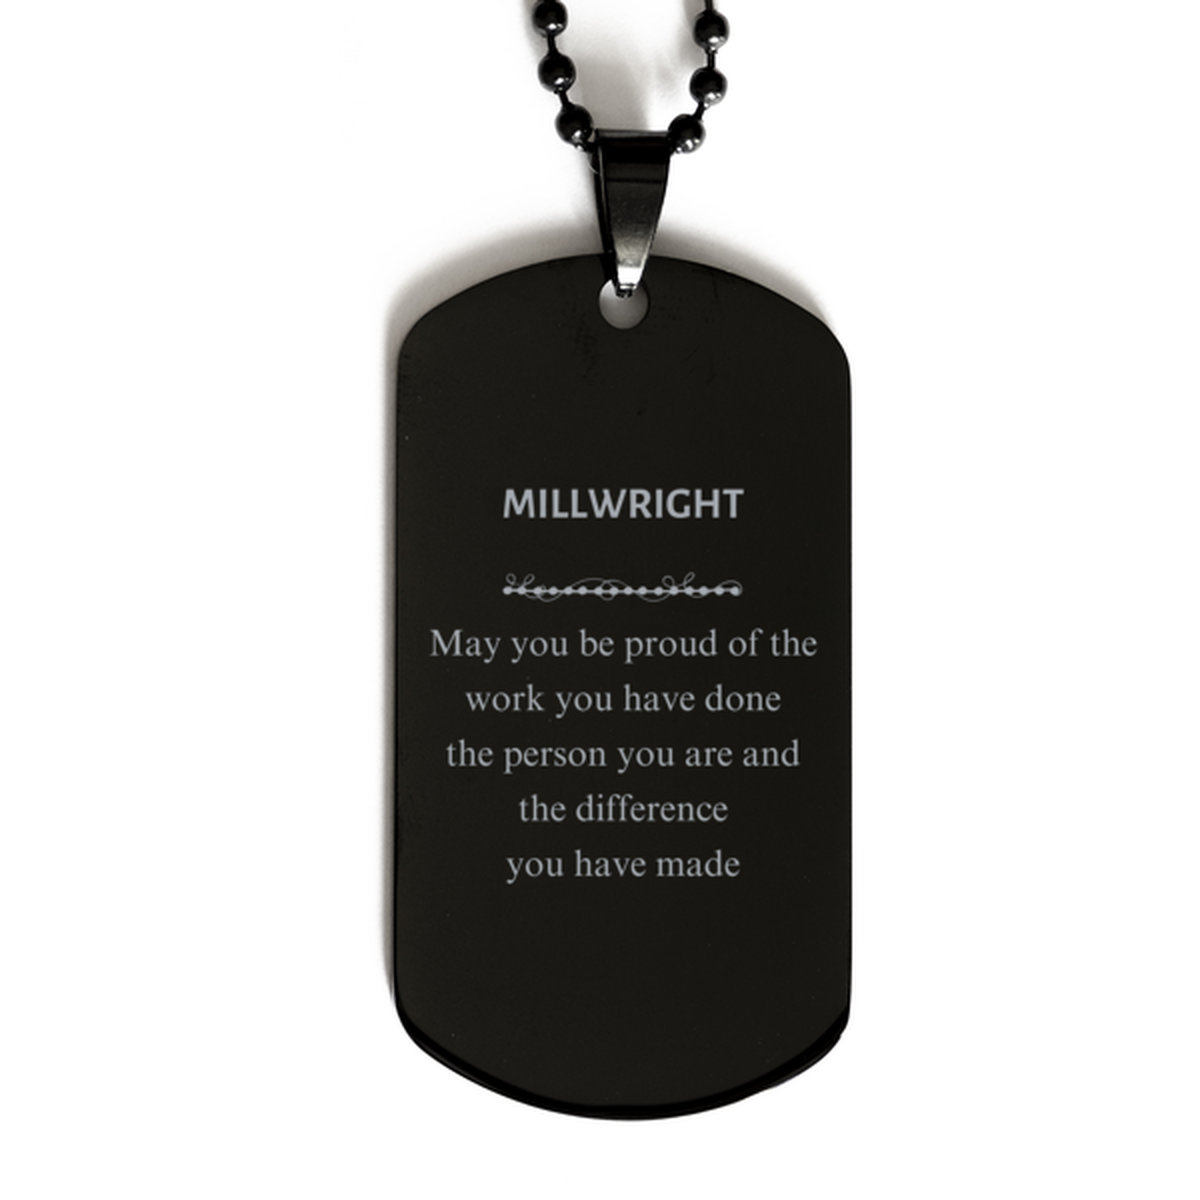 Millwright May you be proud of the work you have done, Retirement Millwright Black Dog Tag for Colleague Appreciation Gifts Amazing for Millwright